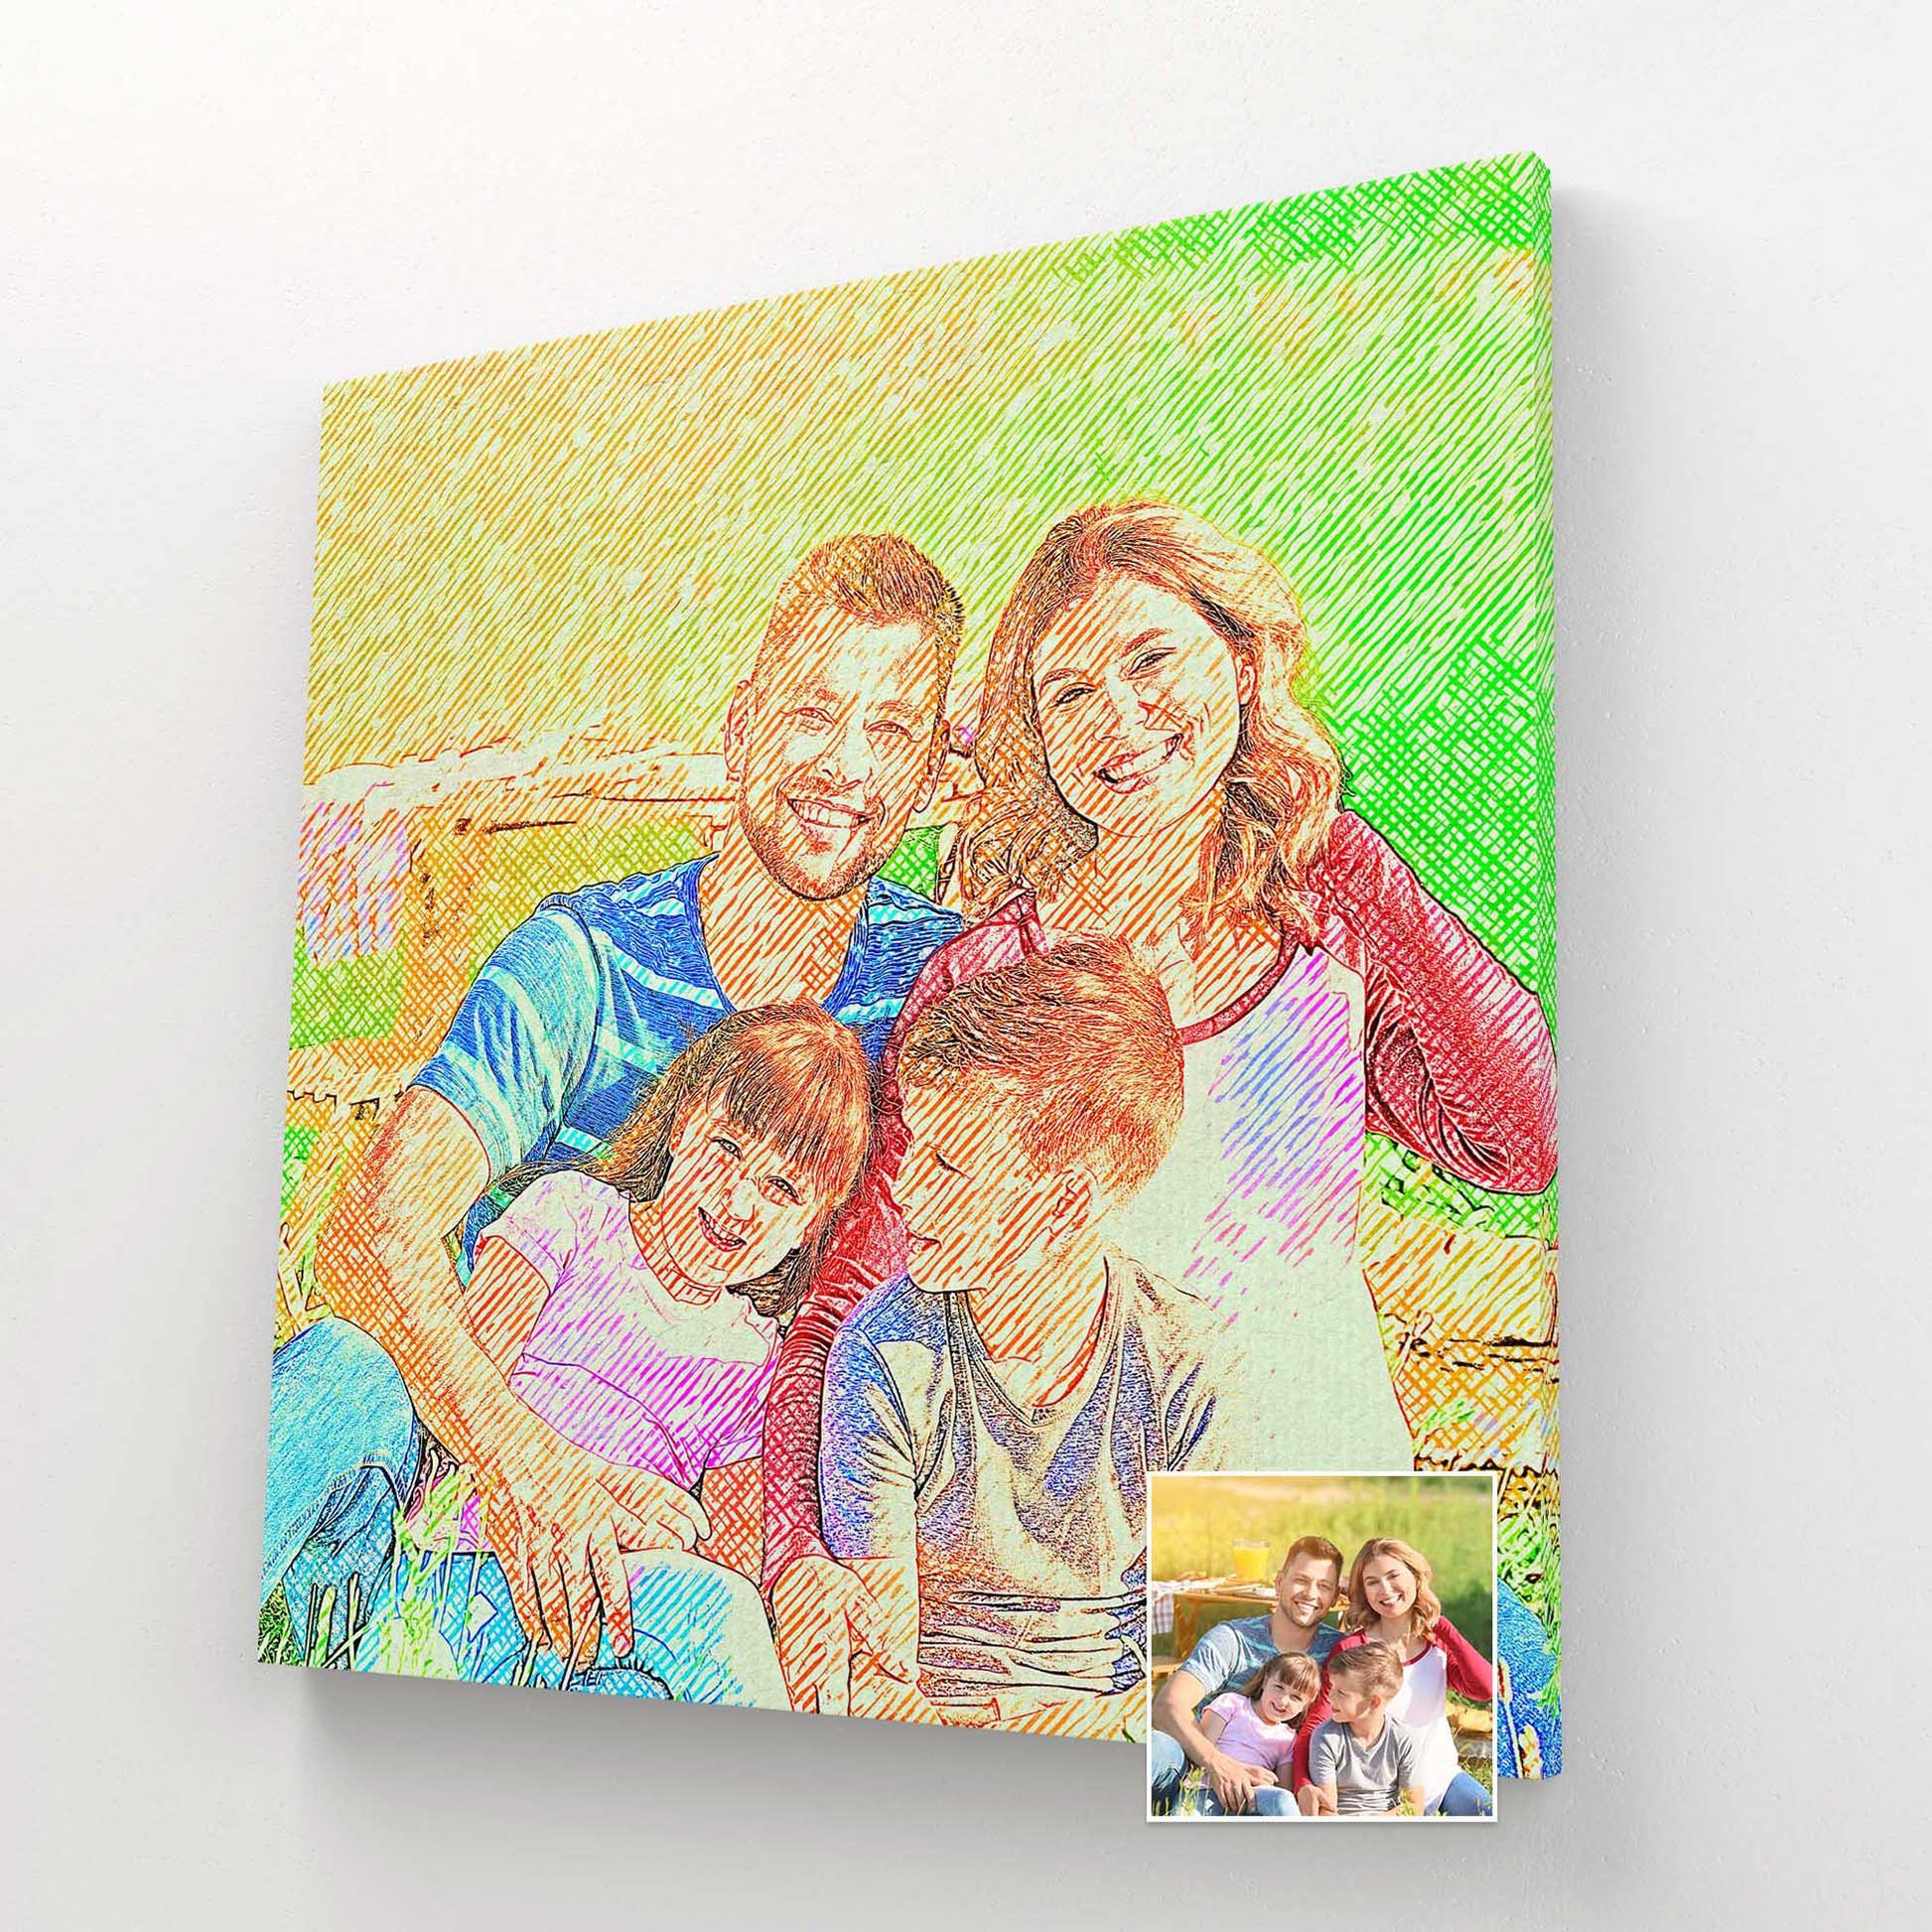 Elevate your space with a Personalised Drawing Crosshatch Canvas, a combination of artistic mastery and personalization. Your photo is carefully hand-drawn using crosshatch techniques and printed on a handmade woven canvas